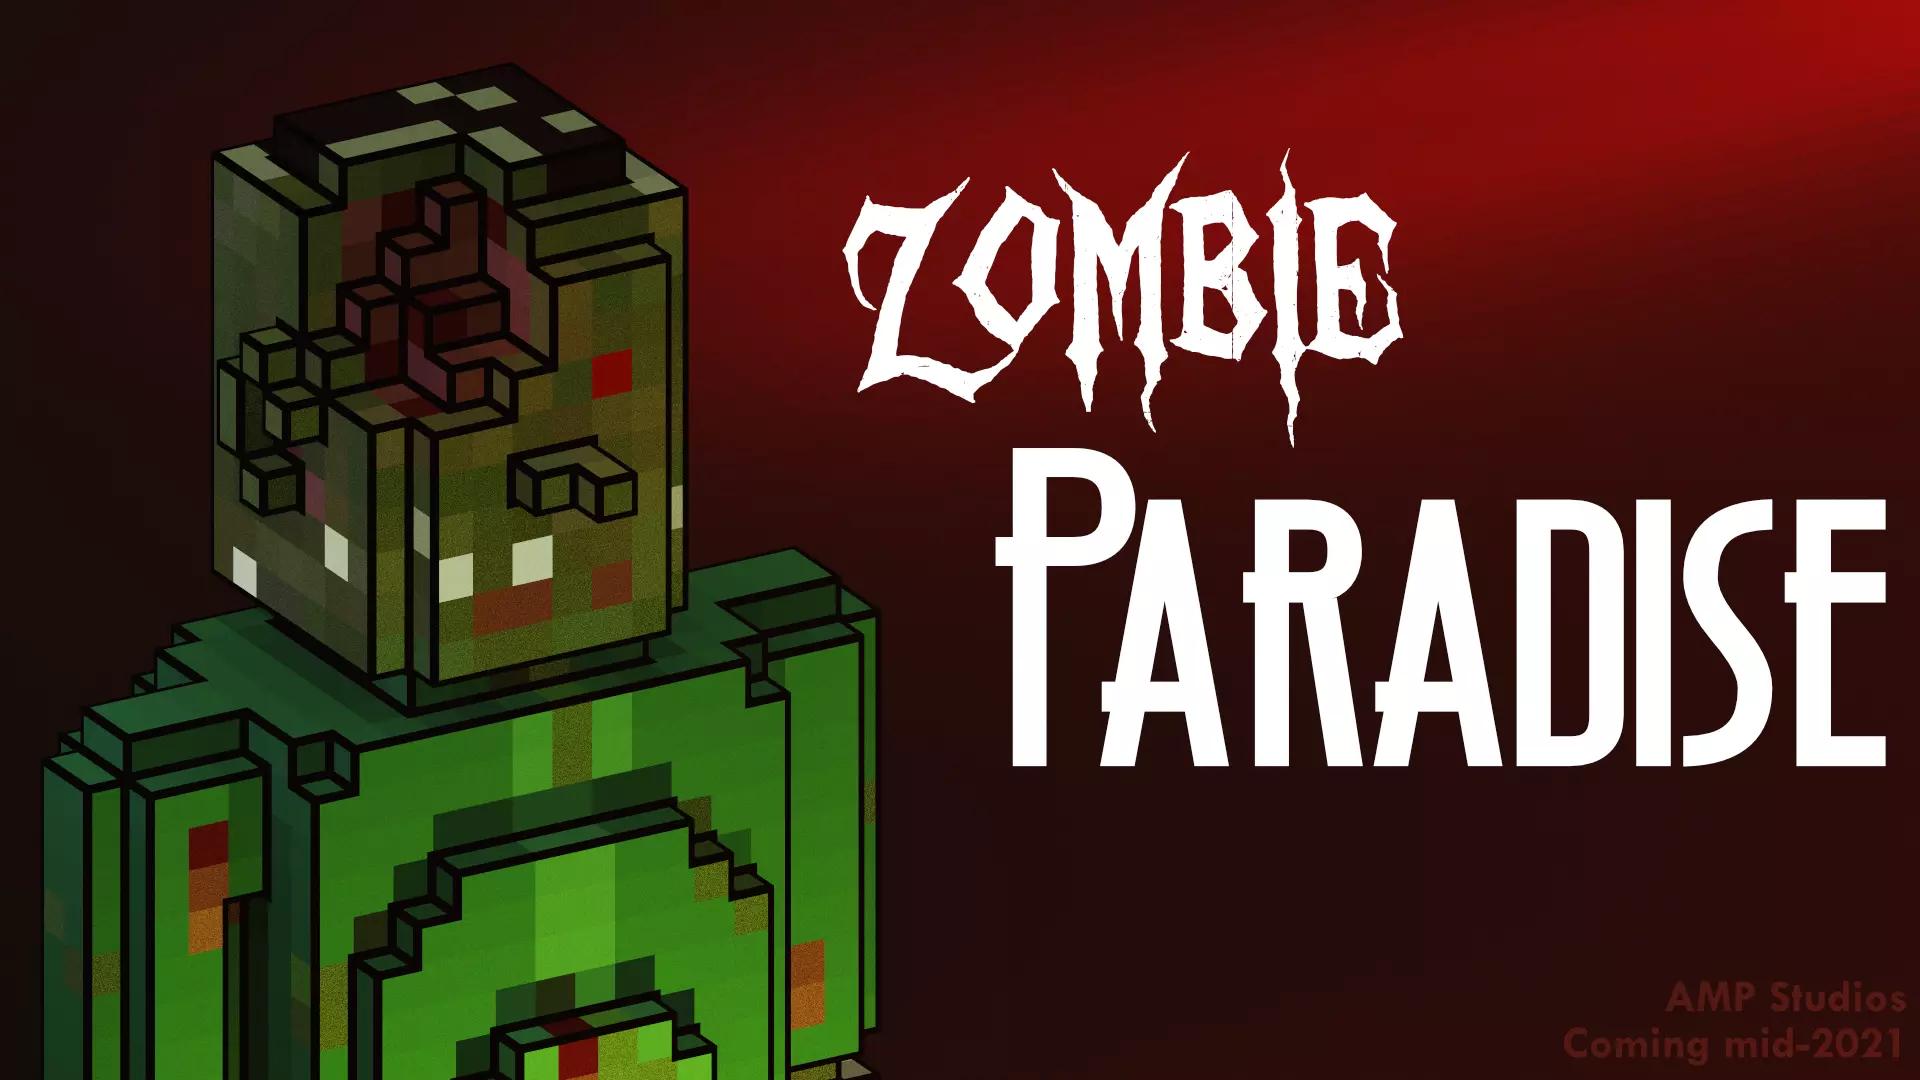 icon of my zombie paradise game project